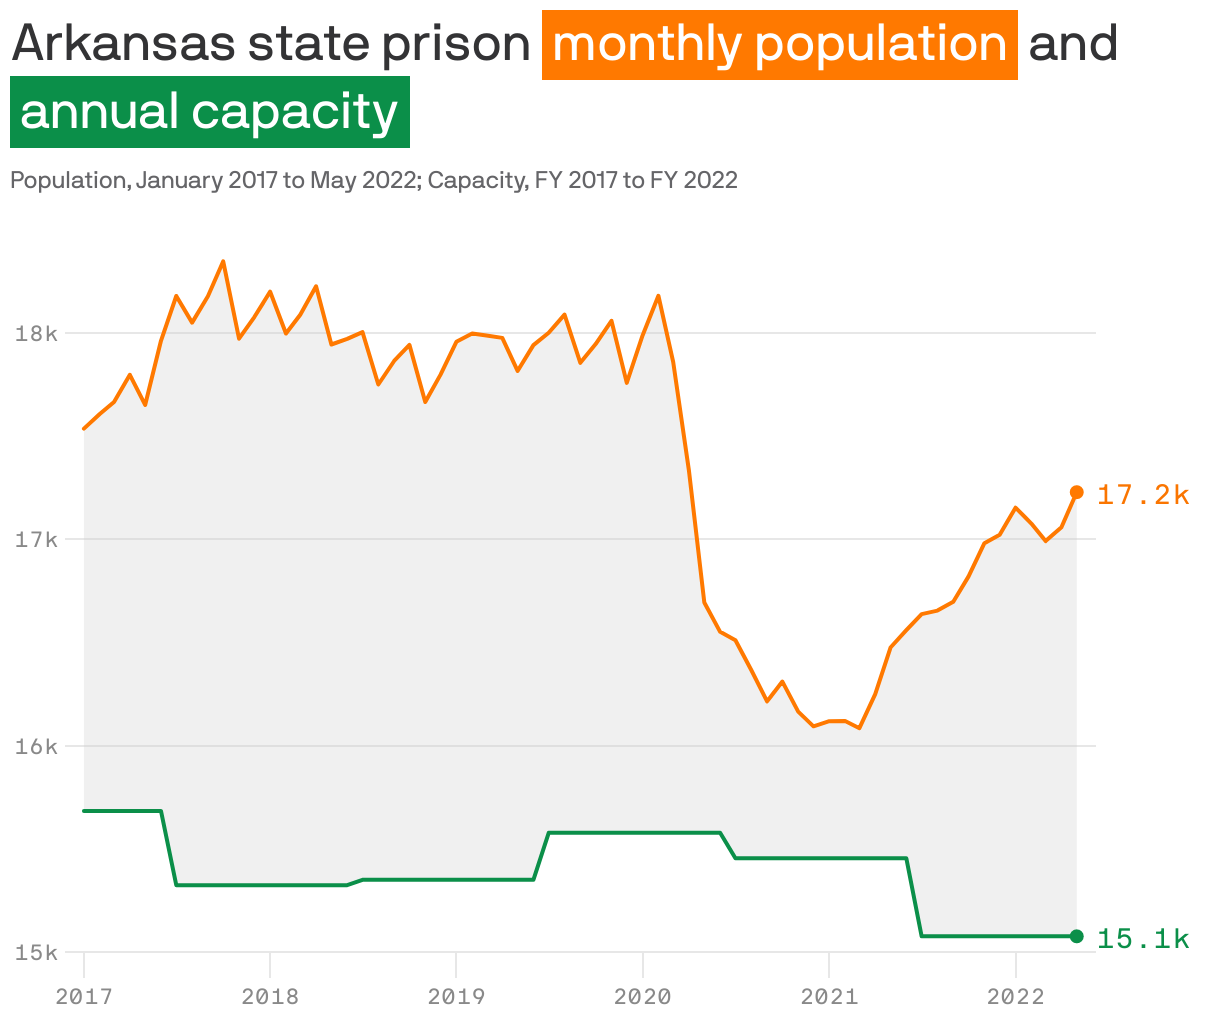 Arkansas state prison <span style="background: #ff7900; padding: 5px; color: white;"> monthly population</span> and <span style="background: #0b8f49; padding: 5px; color: white;">annual capacity</span>